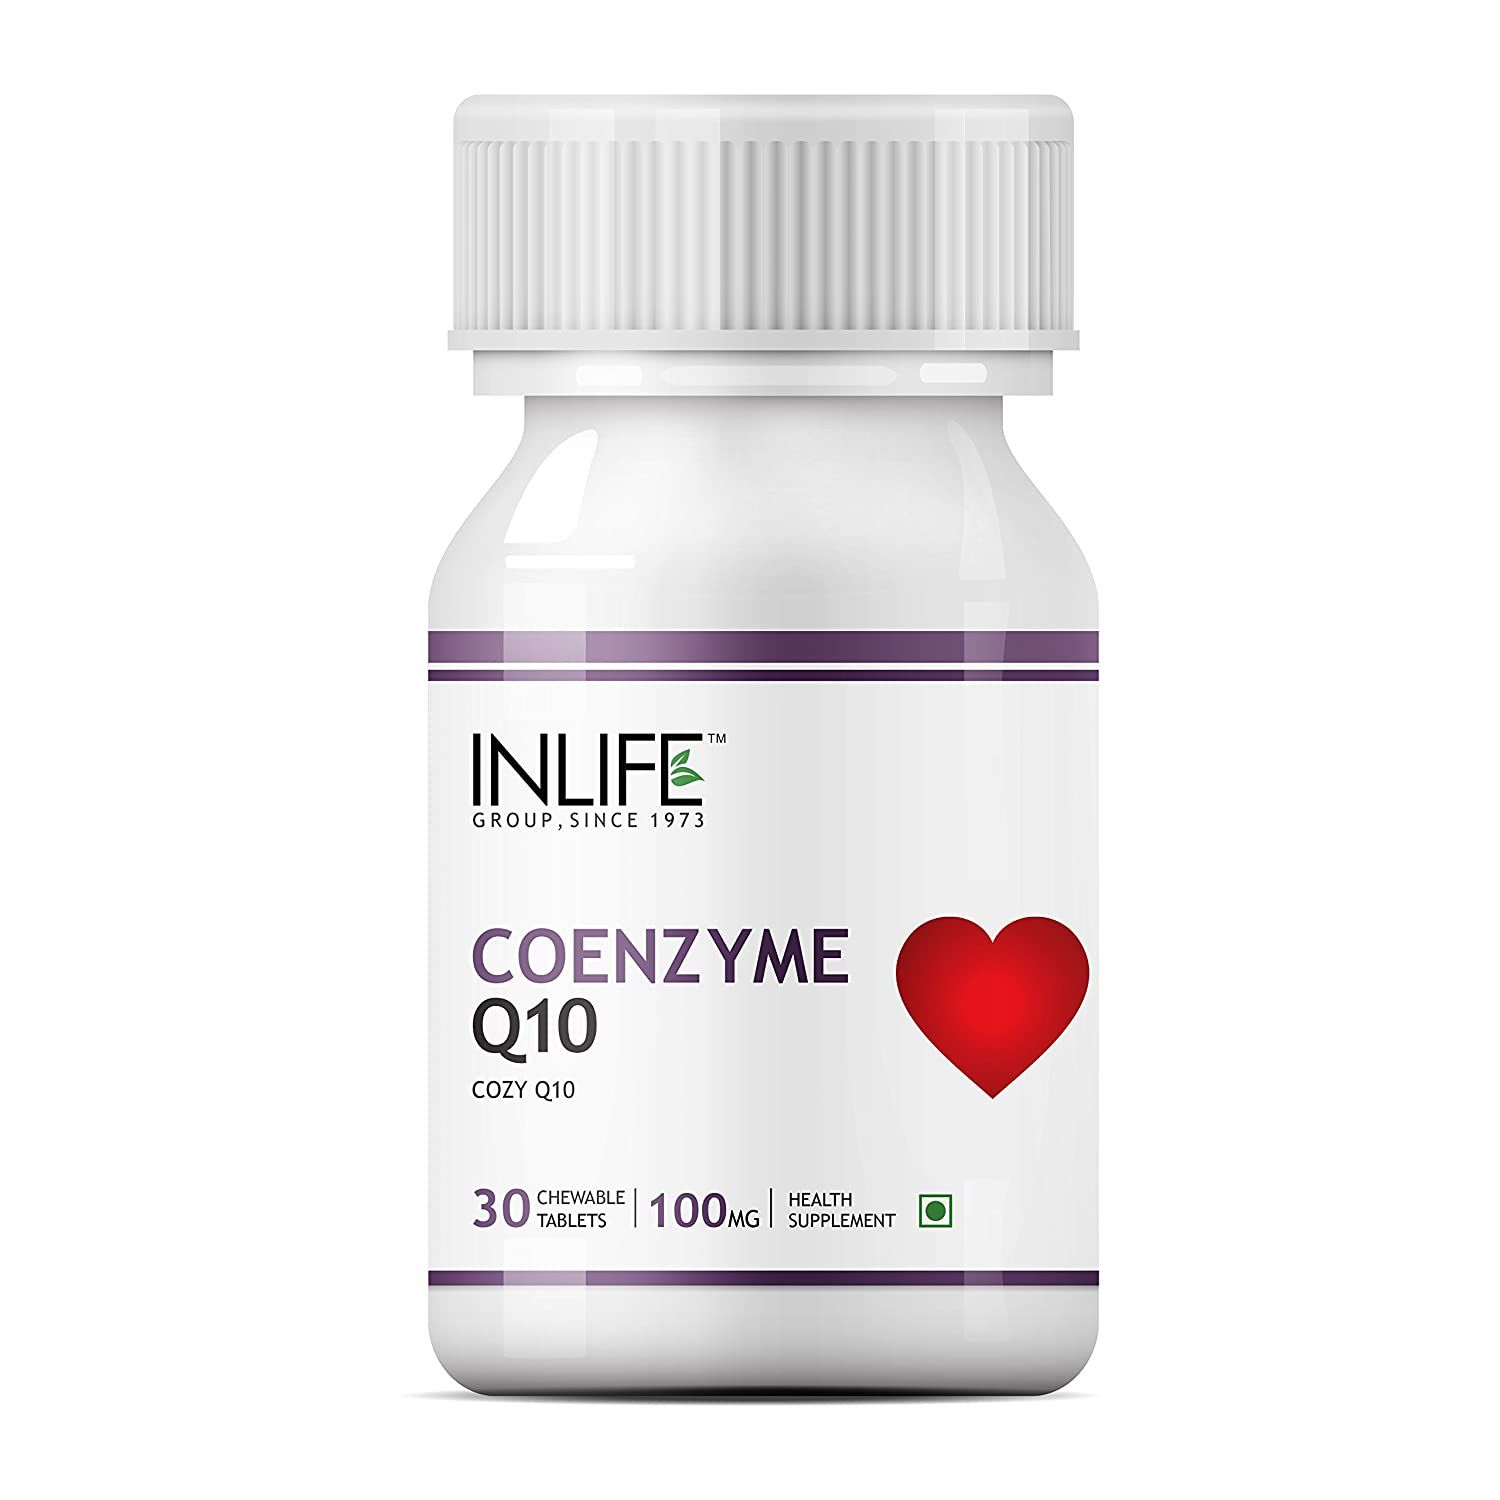 Inlife Coenzyme Q10 CoQ10 Image